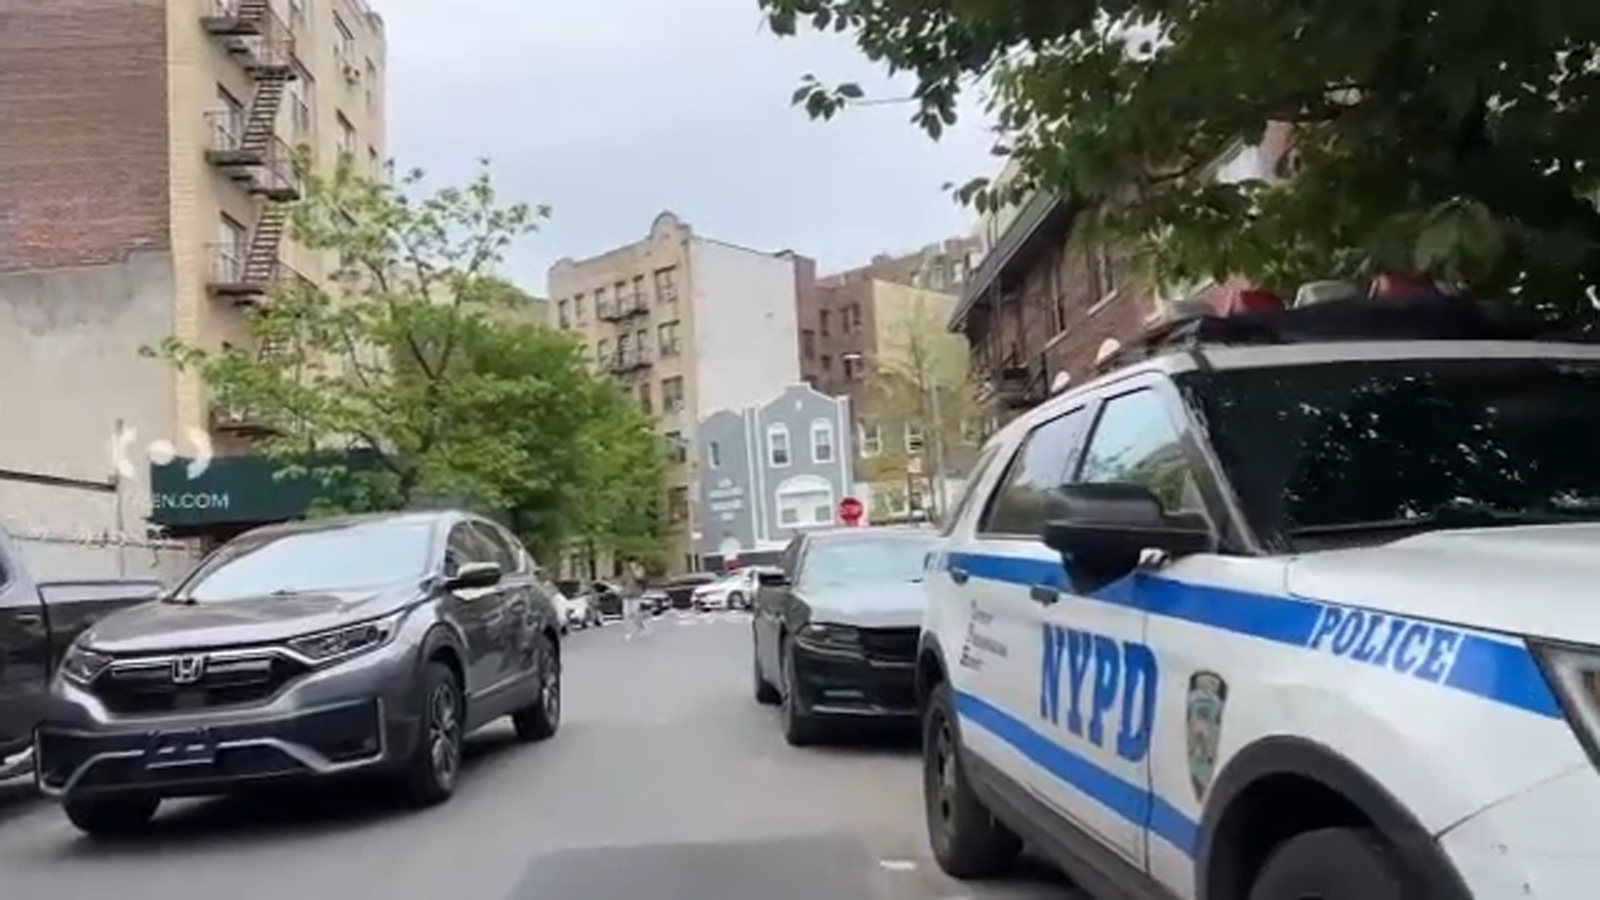 Bronx shooting: 2 people found dead with gunshot wounds to their head in Morris Heights [Video]